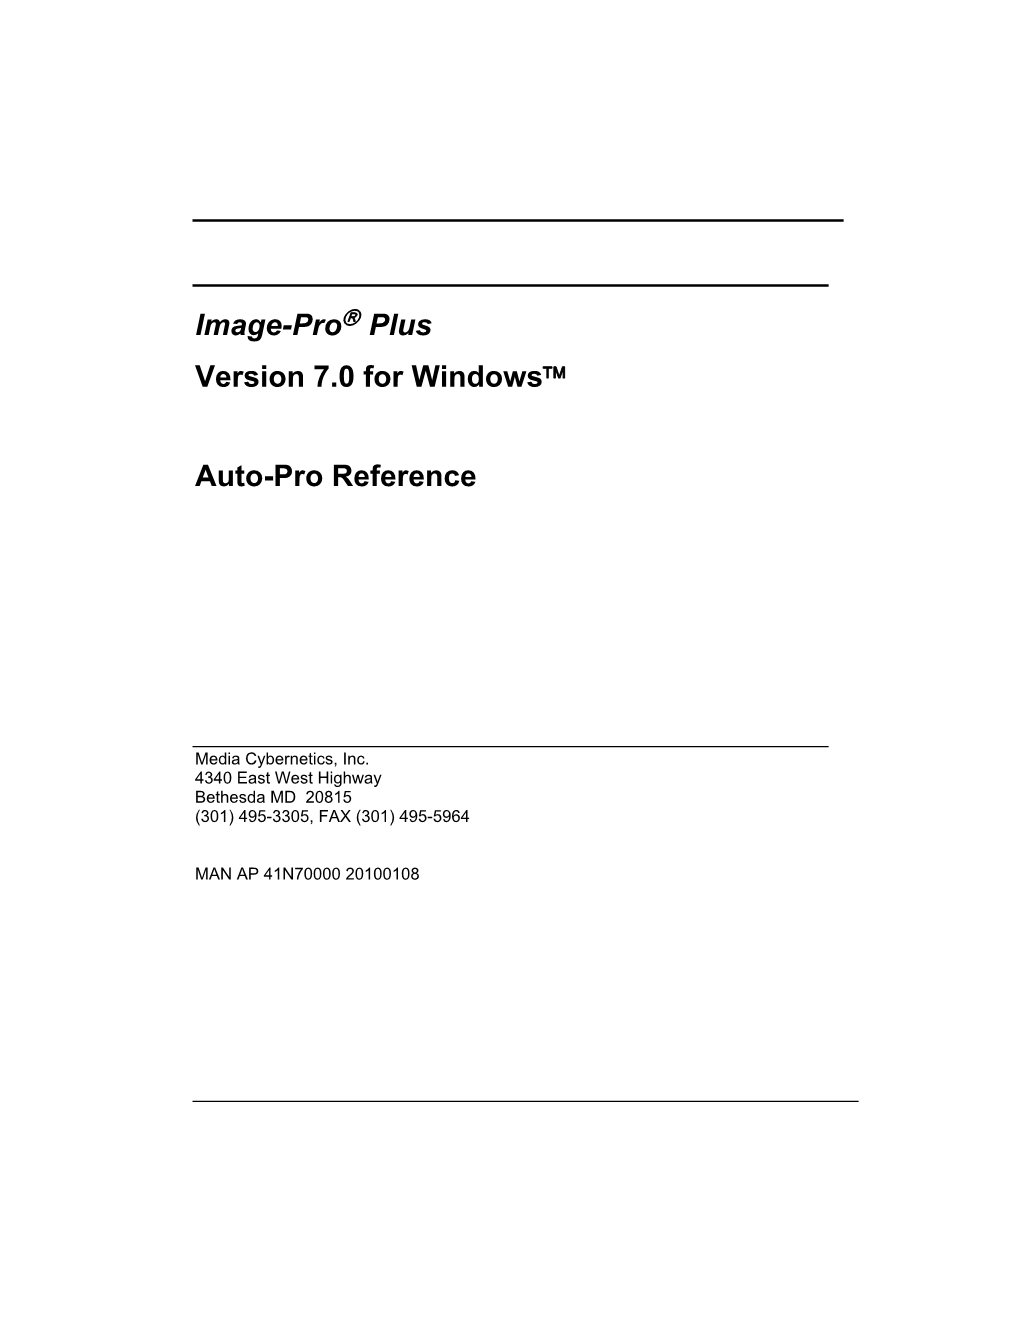 Image-Pro Plus Version 7.0 for Windows™ Auto-Pro Reference